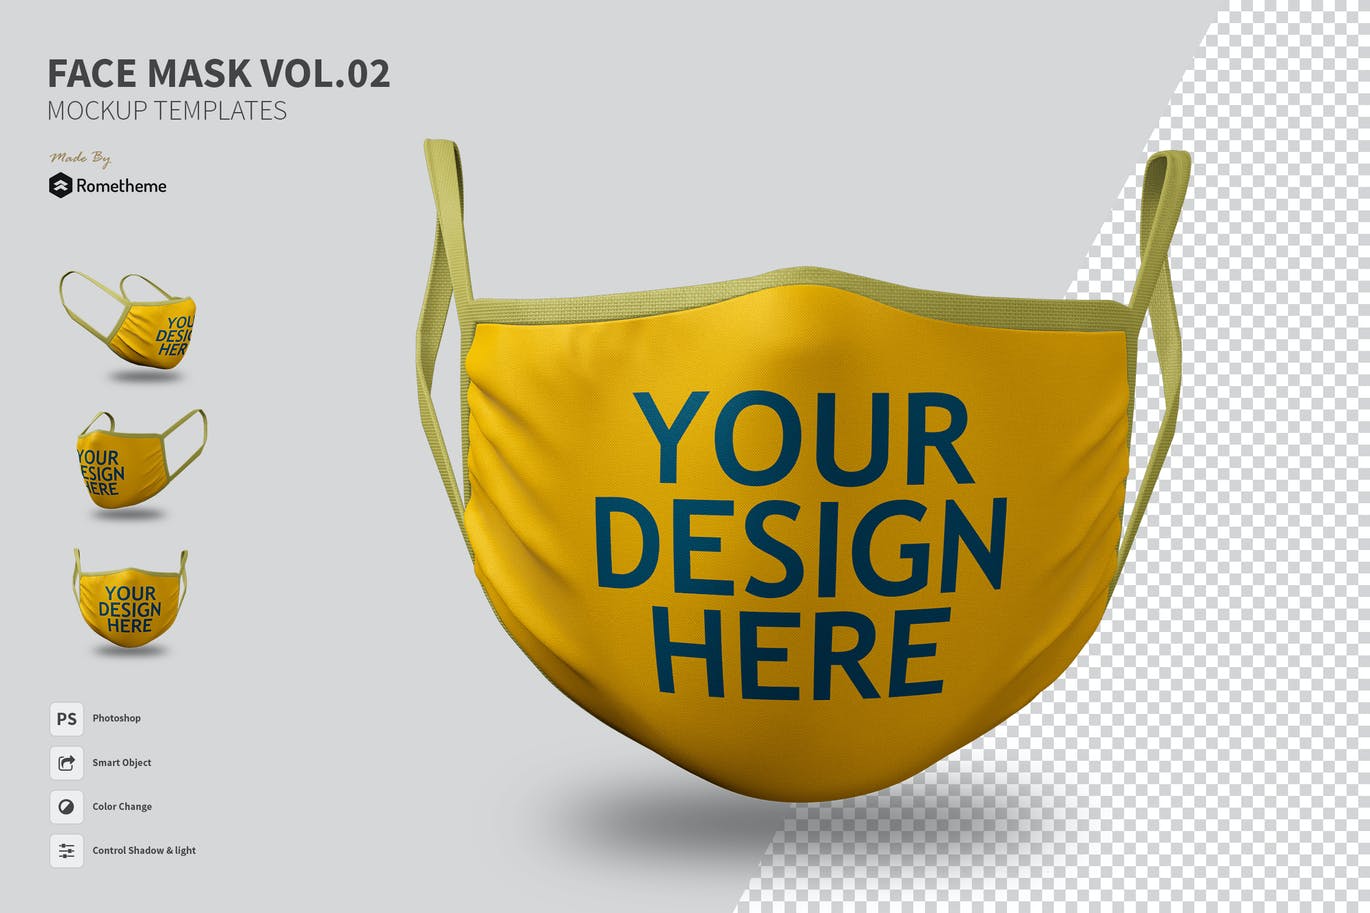 Download 25 Outstanding Face Mask Psd Mockup Templates Decolore Net PSD Mockup Templates